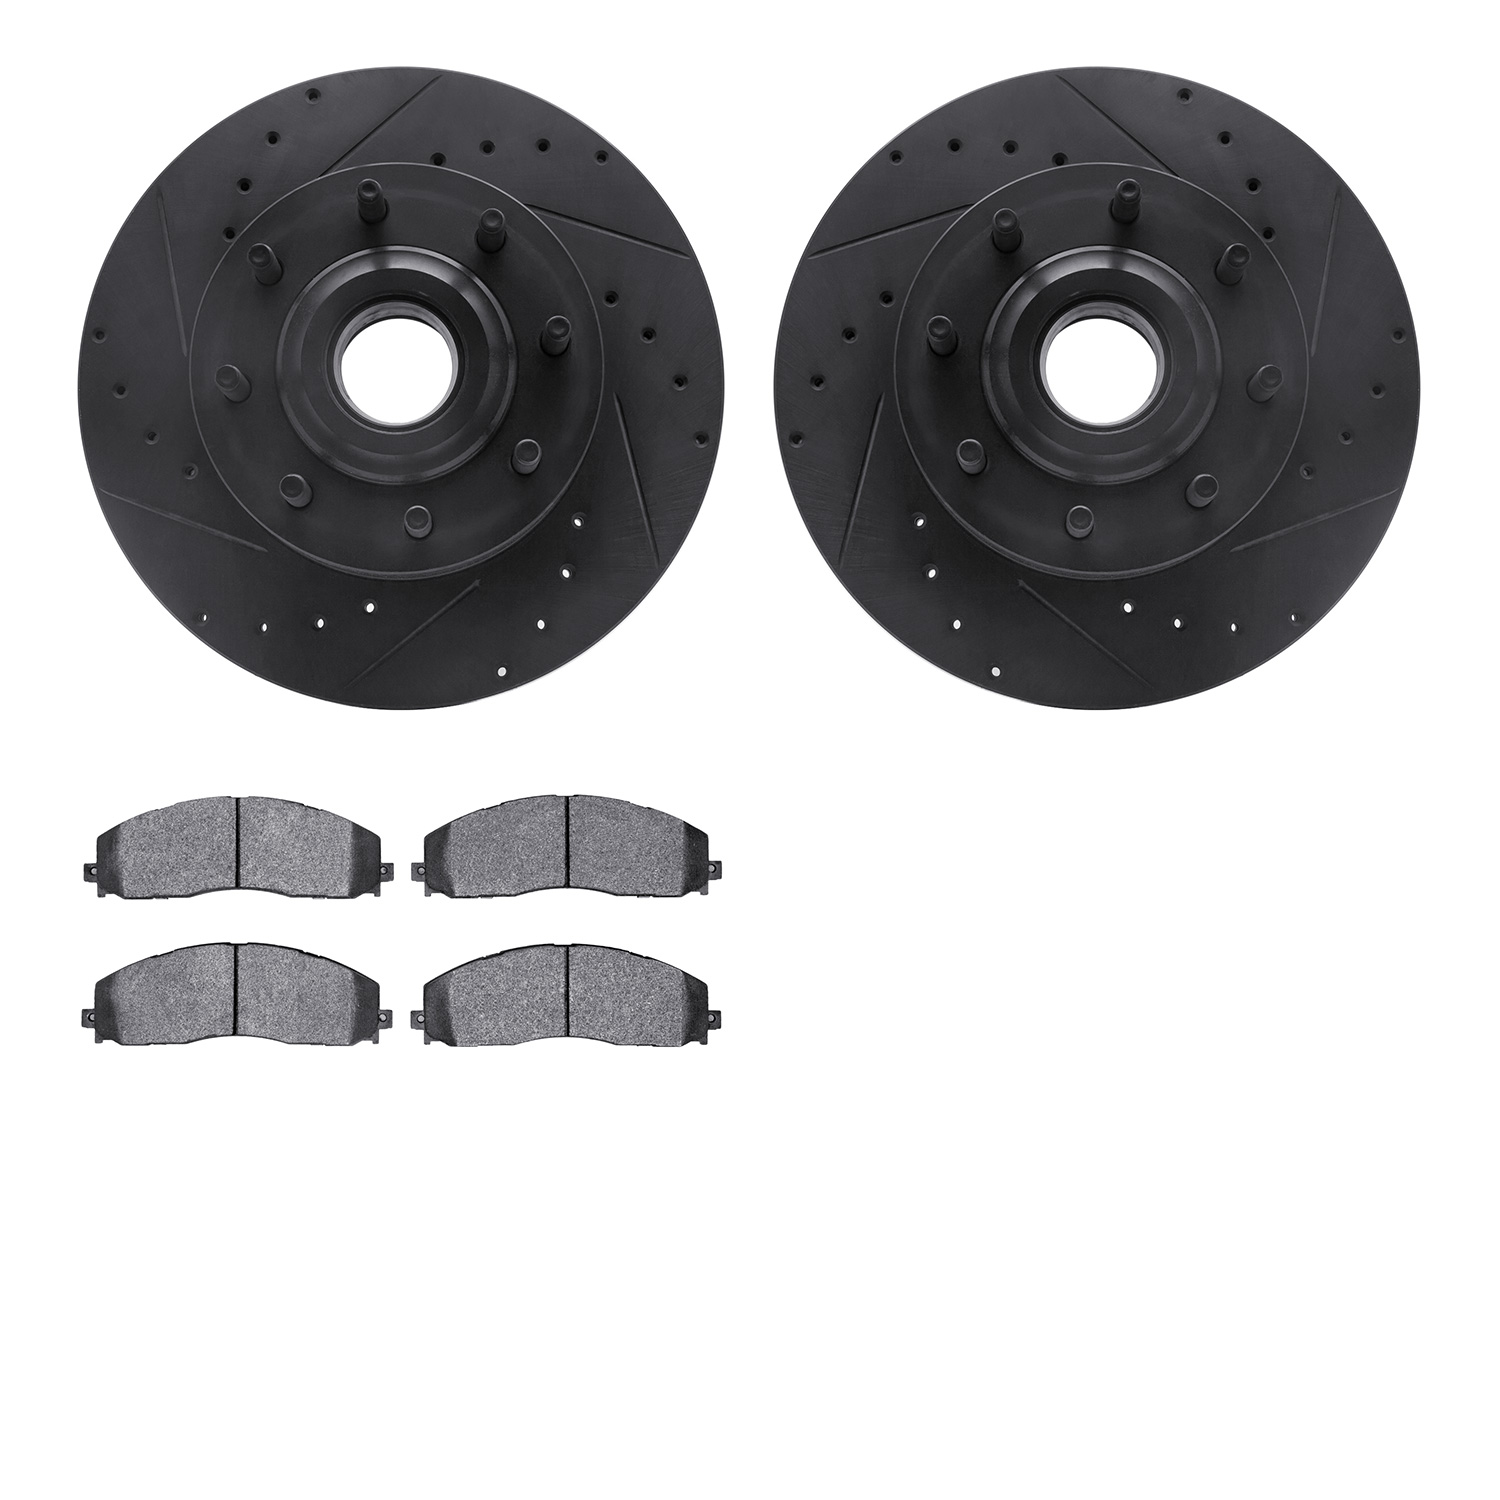 8502-99678 Drilled/Slotted Brake Rotors w/5000 Advanced Brake Pads Kit [Black], Fits Select Ford/Lincoln/Mercury/Mazda, Position